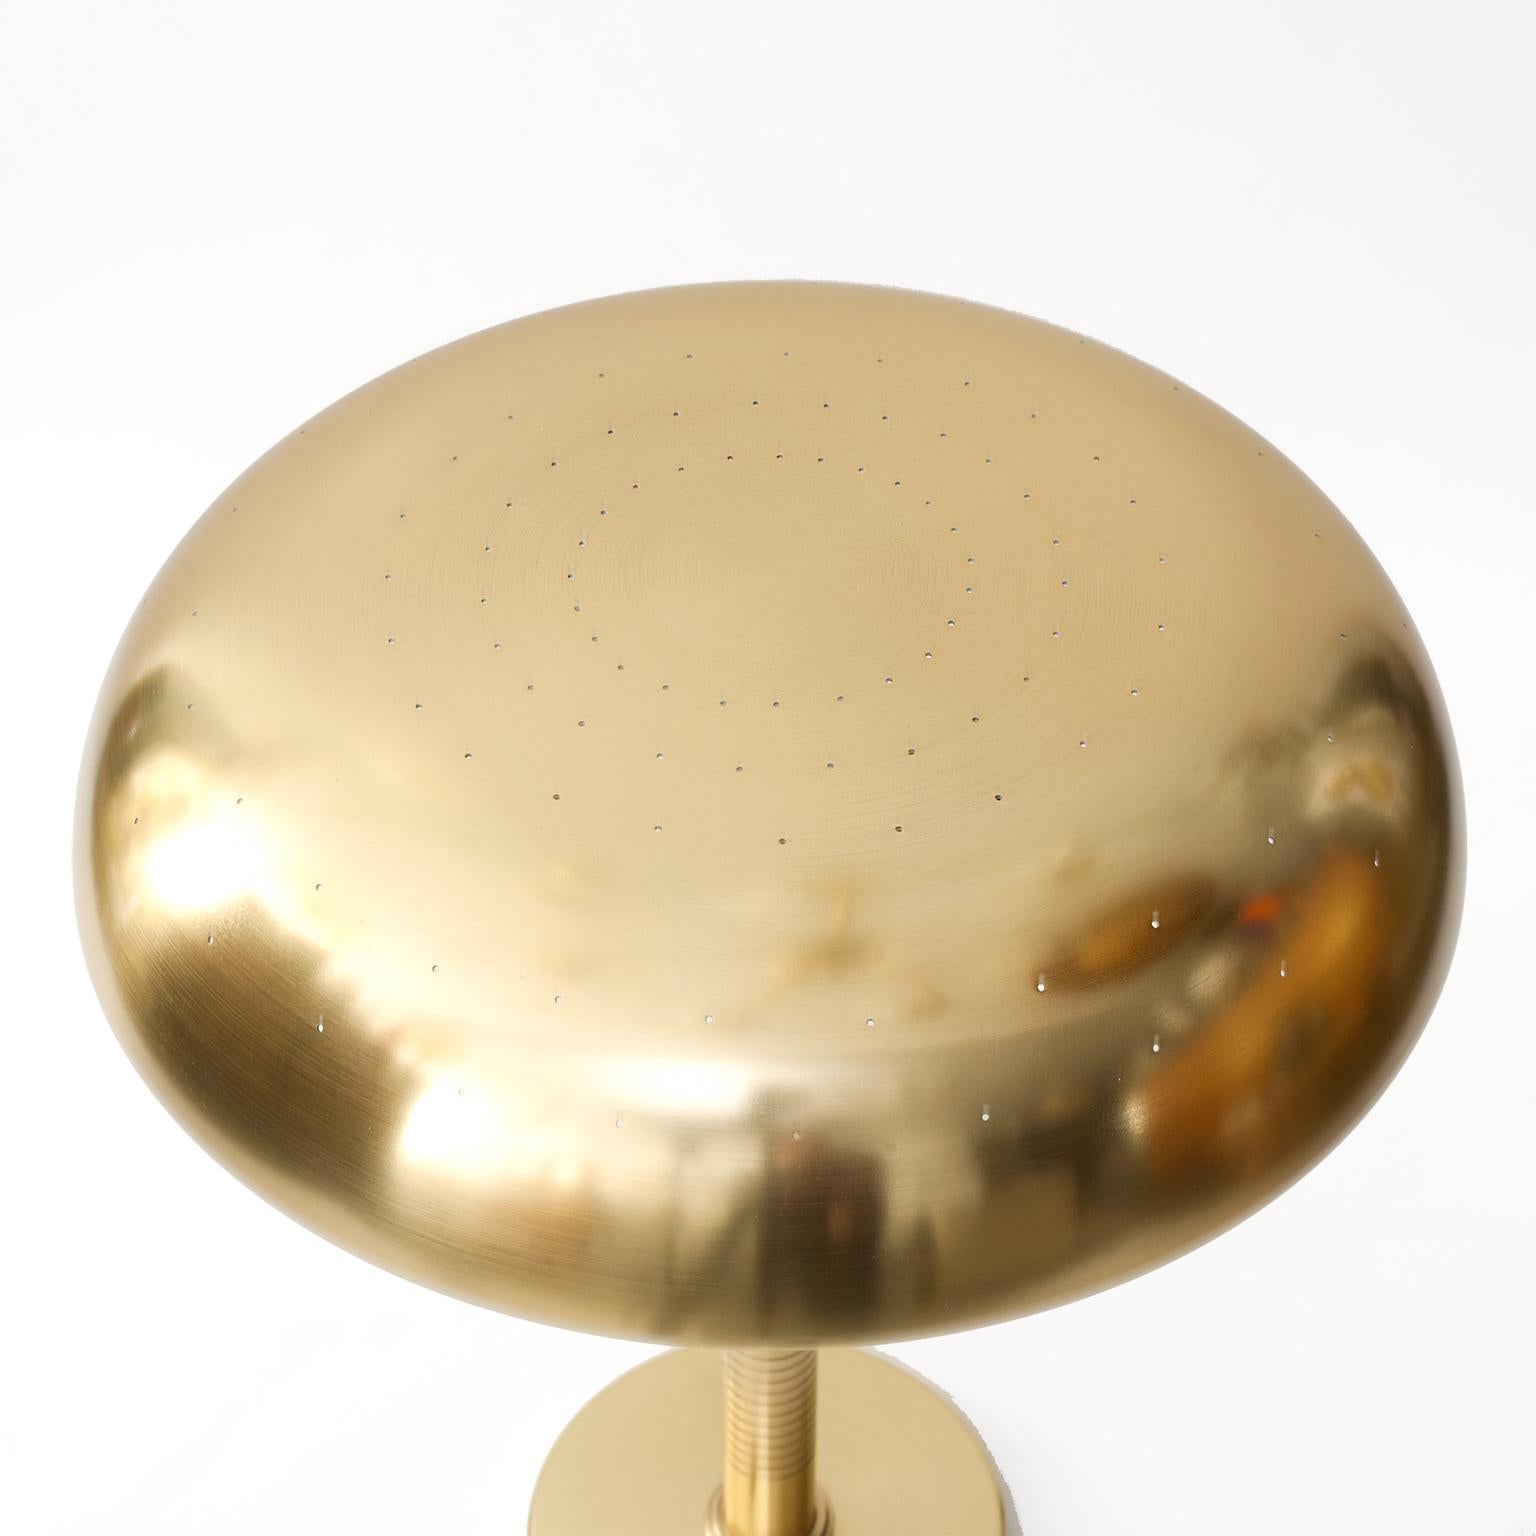 Scandinavian Modern Polished Brass Lamp by Bertil Brisborg for Bohlmarks In Good Condition For Sale In New York, NY